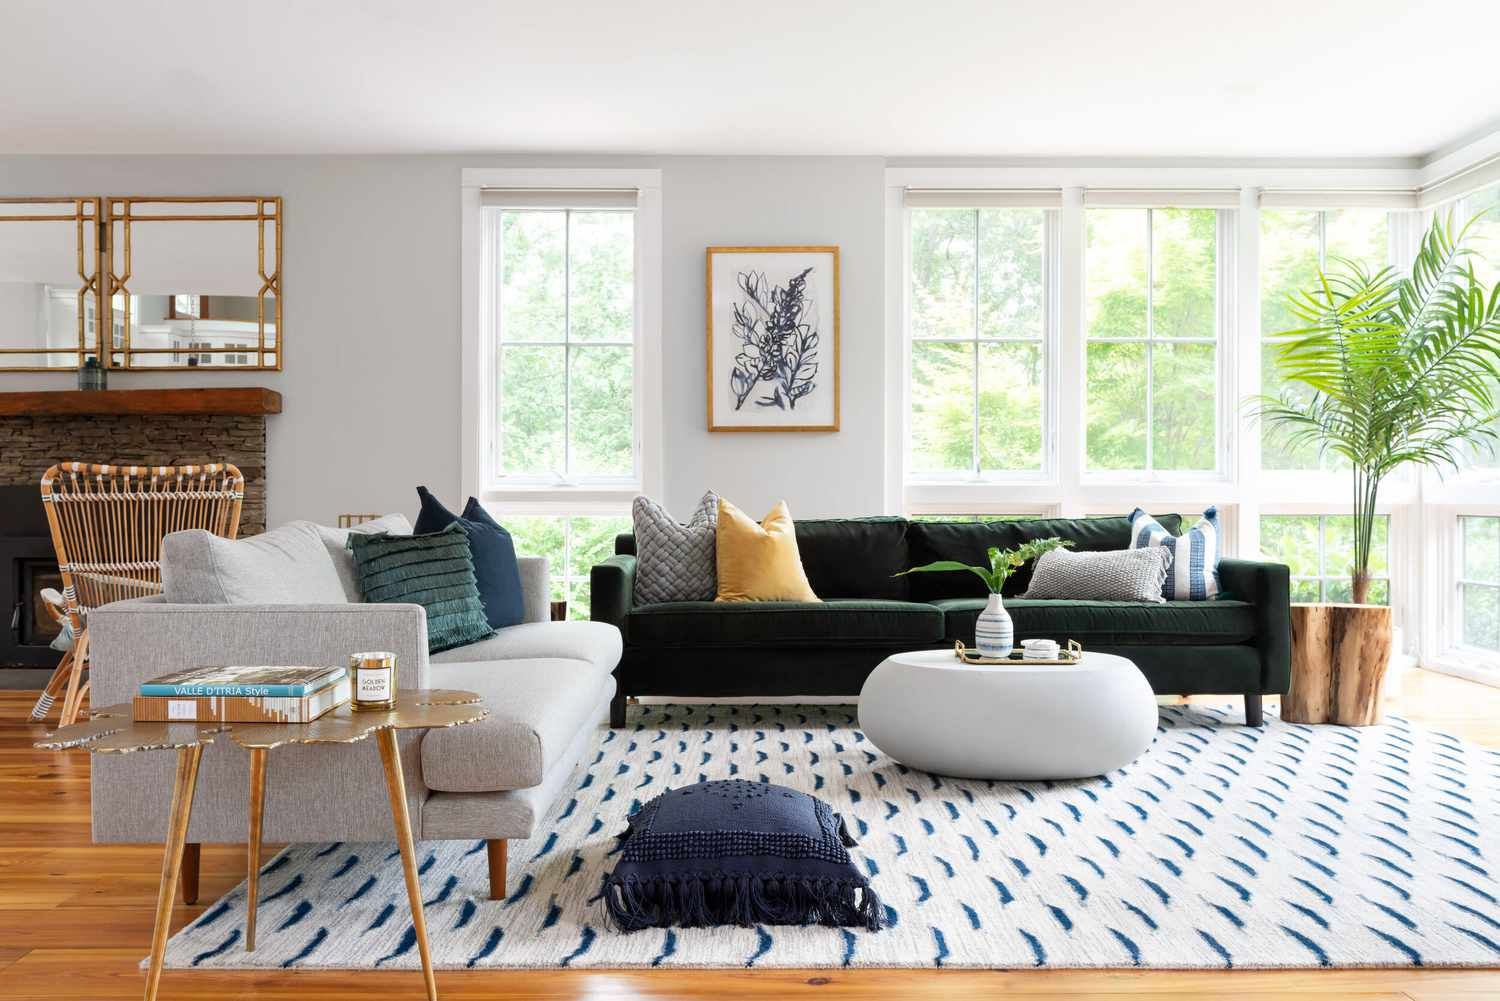 How To Arrange Two Sofas In A Living Room Throughout Sofas In Multiple Colors (View 15 of 20)